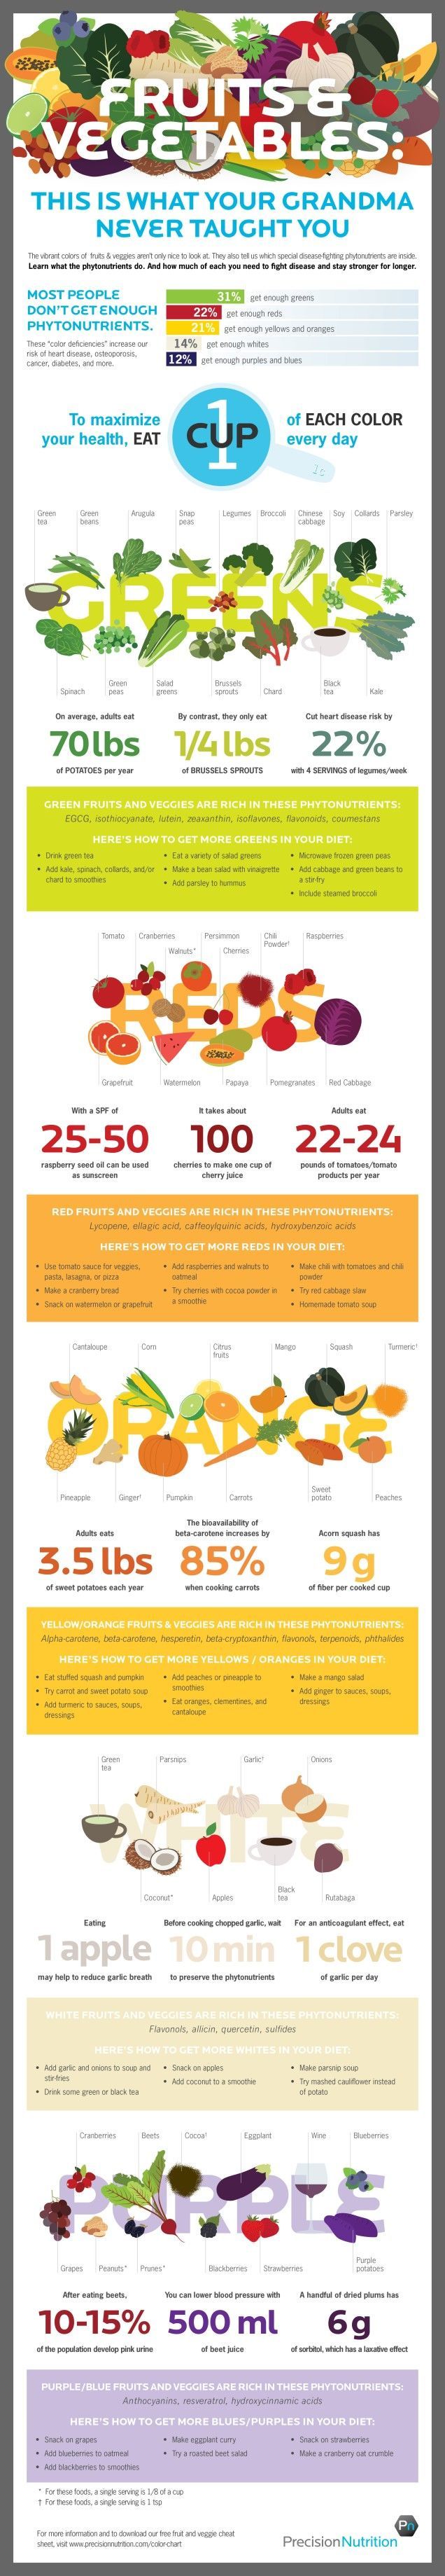 This Infographic Shows the Phytonutrients You Need to Stay Healthy and How to Include Veggies and Fruits in Your Diet